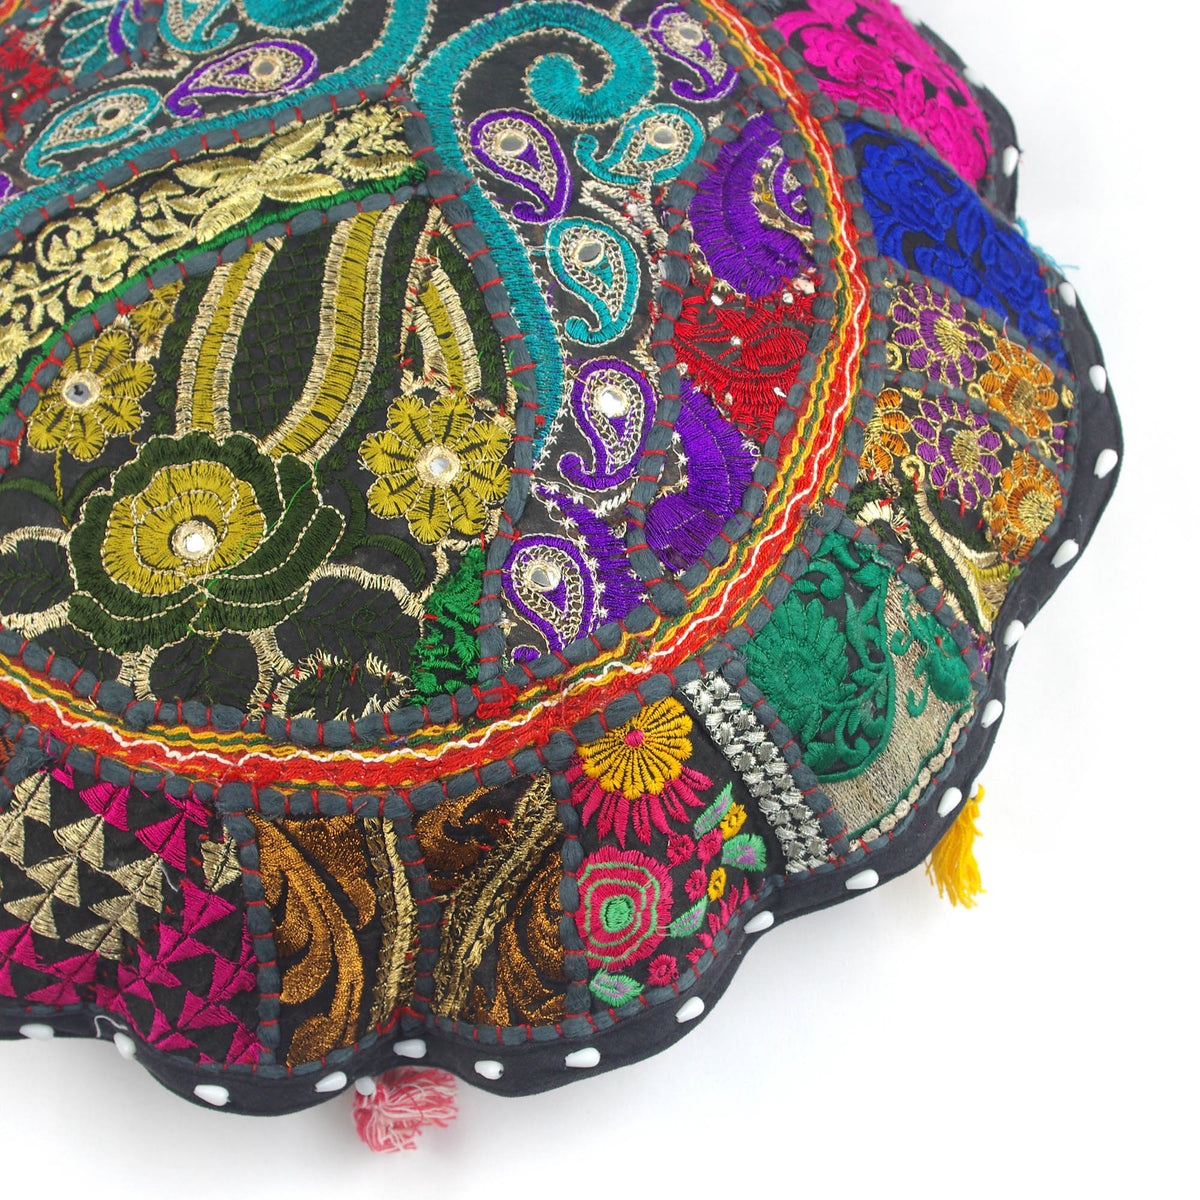 Black Multi Round Floor Embroidered Patchwork Pouf Ottoman Indian Vintage Cushion Cover 18"